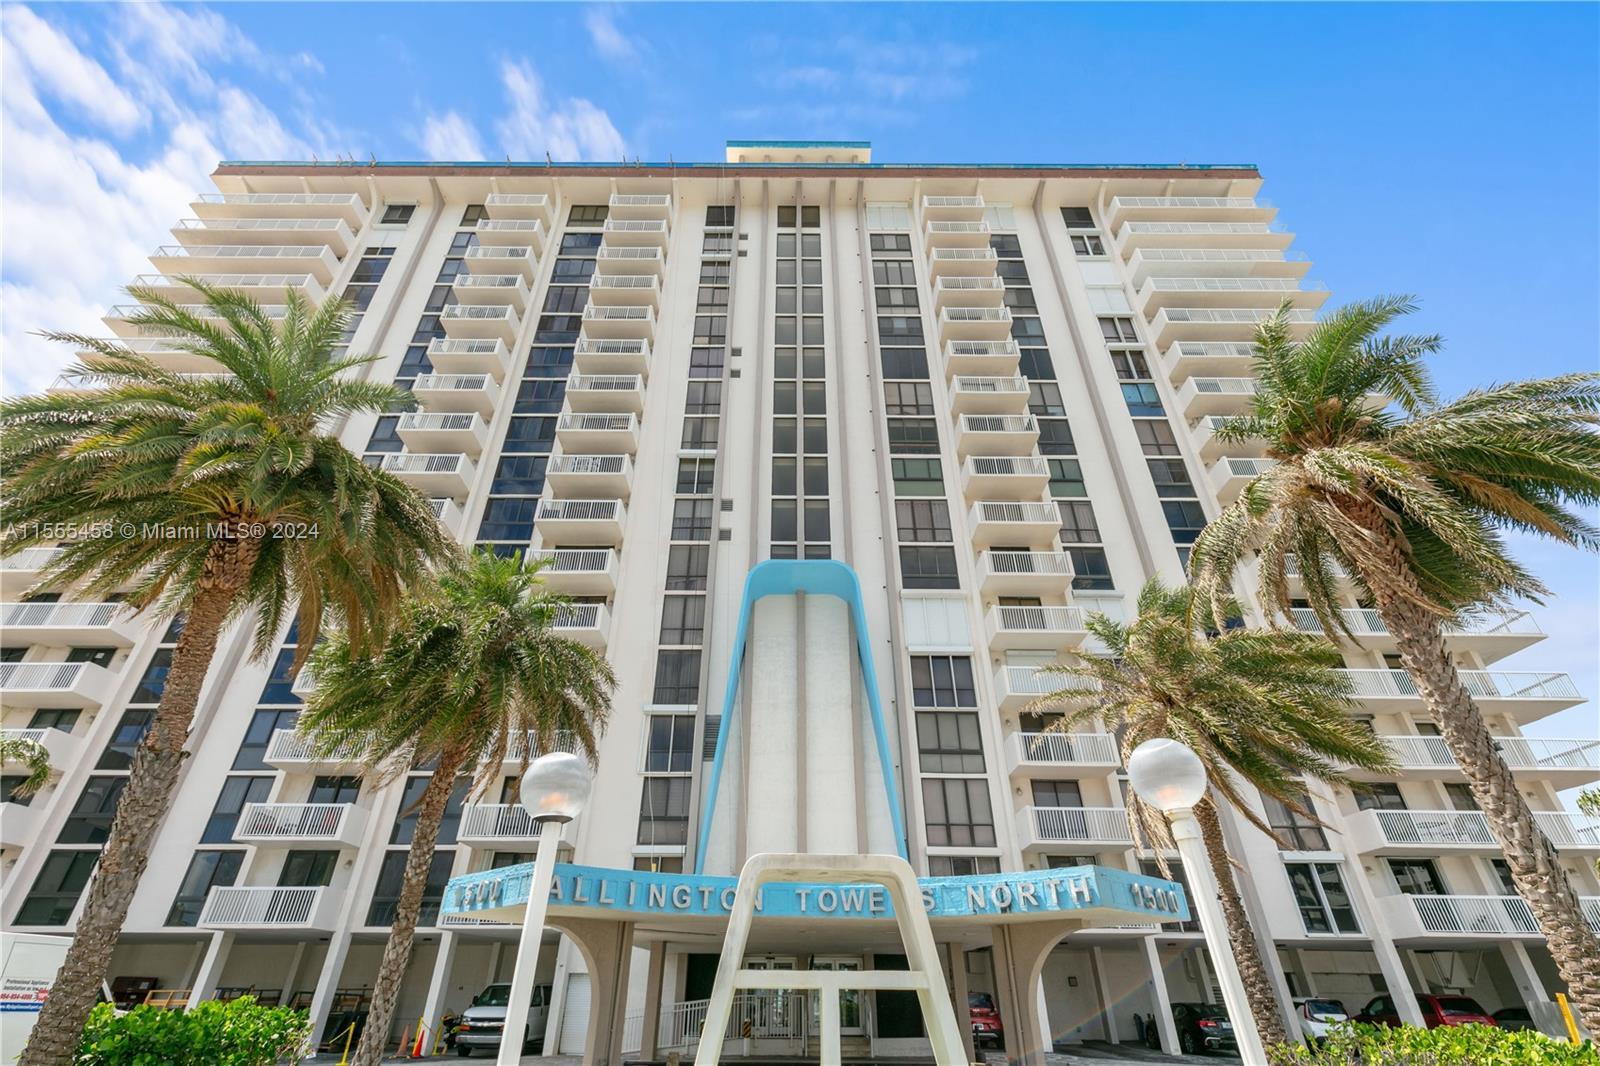 Photo of 1500 S Ocean Dr #16H in Hollywood, FL